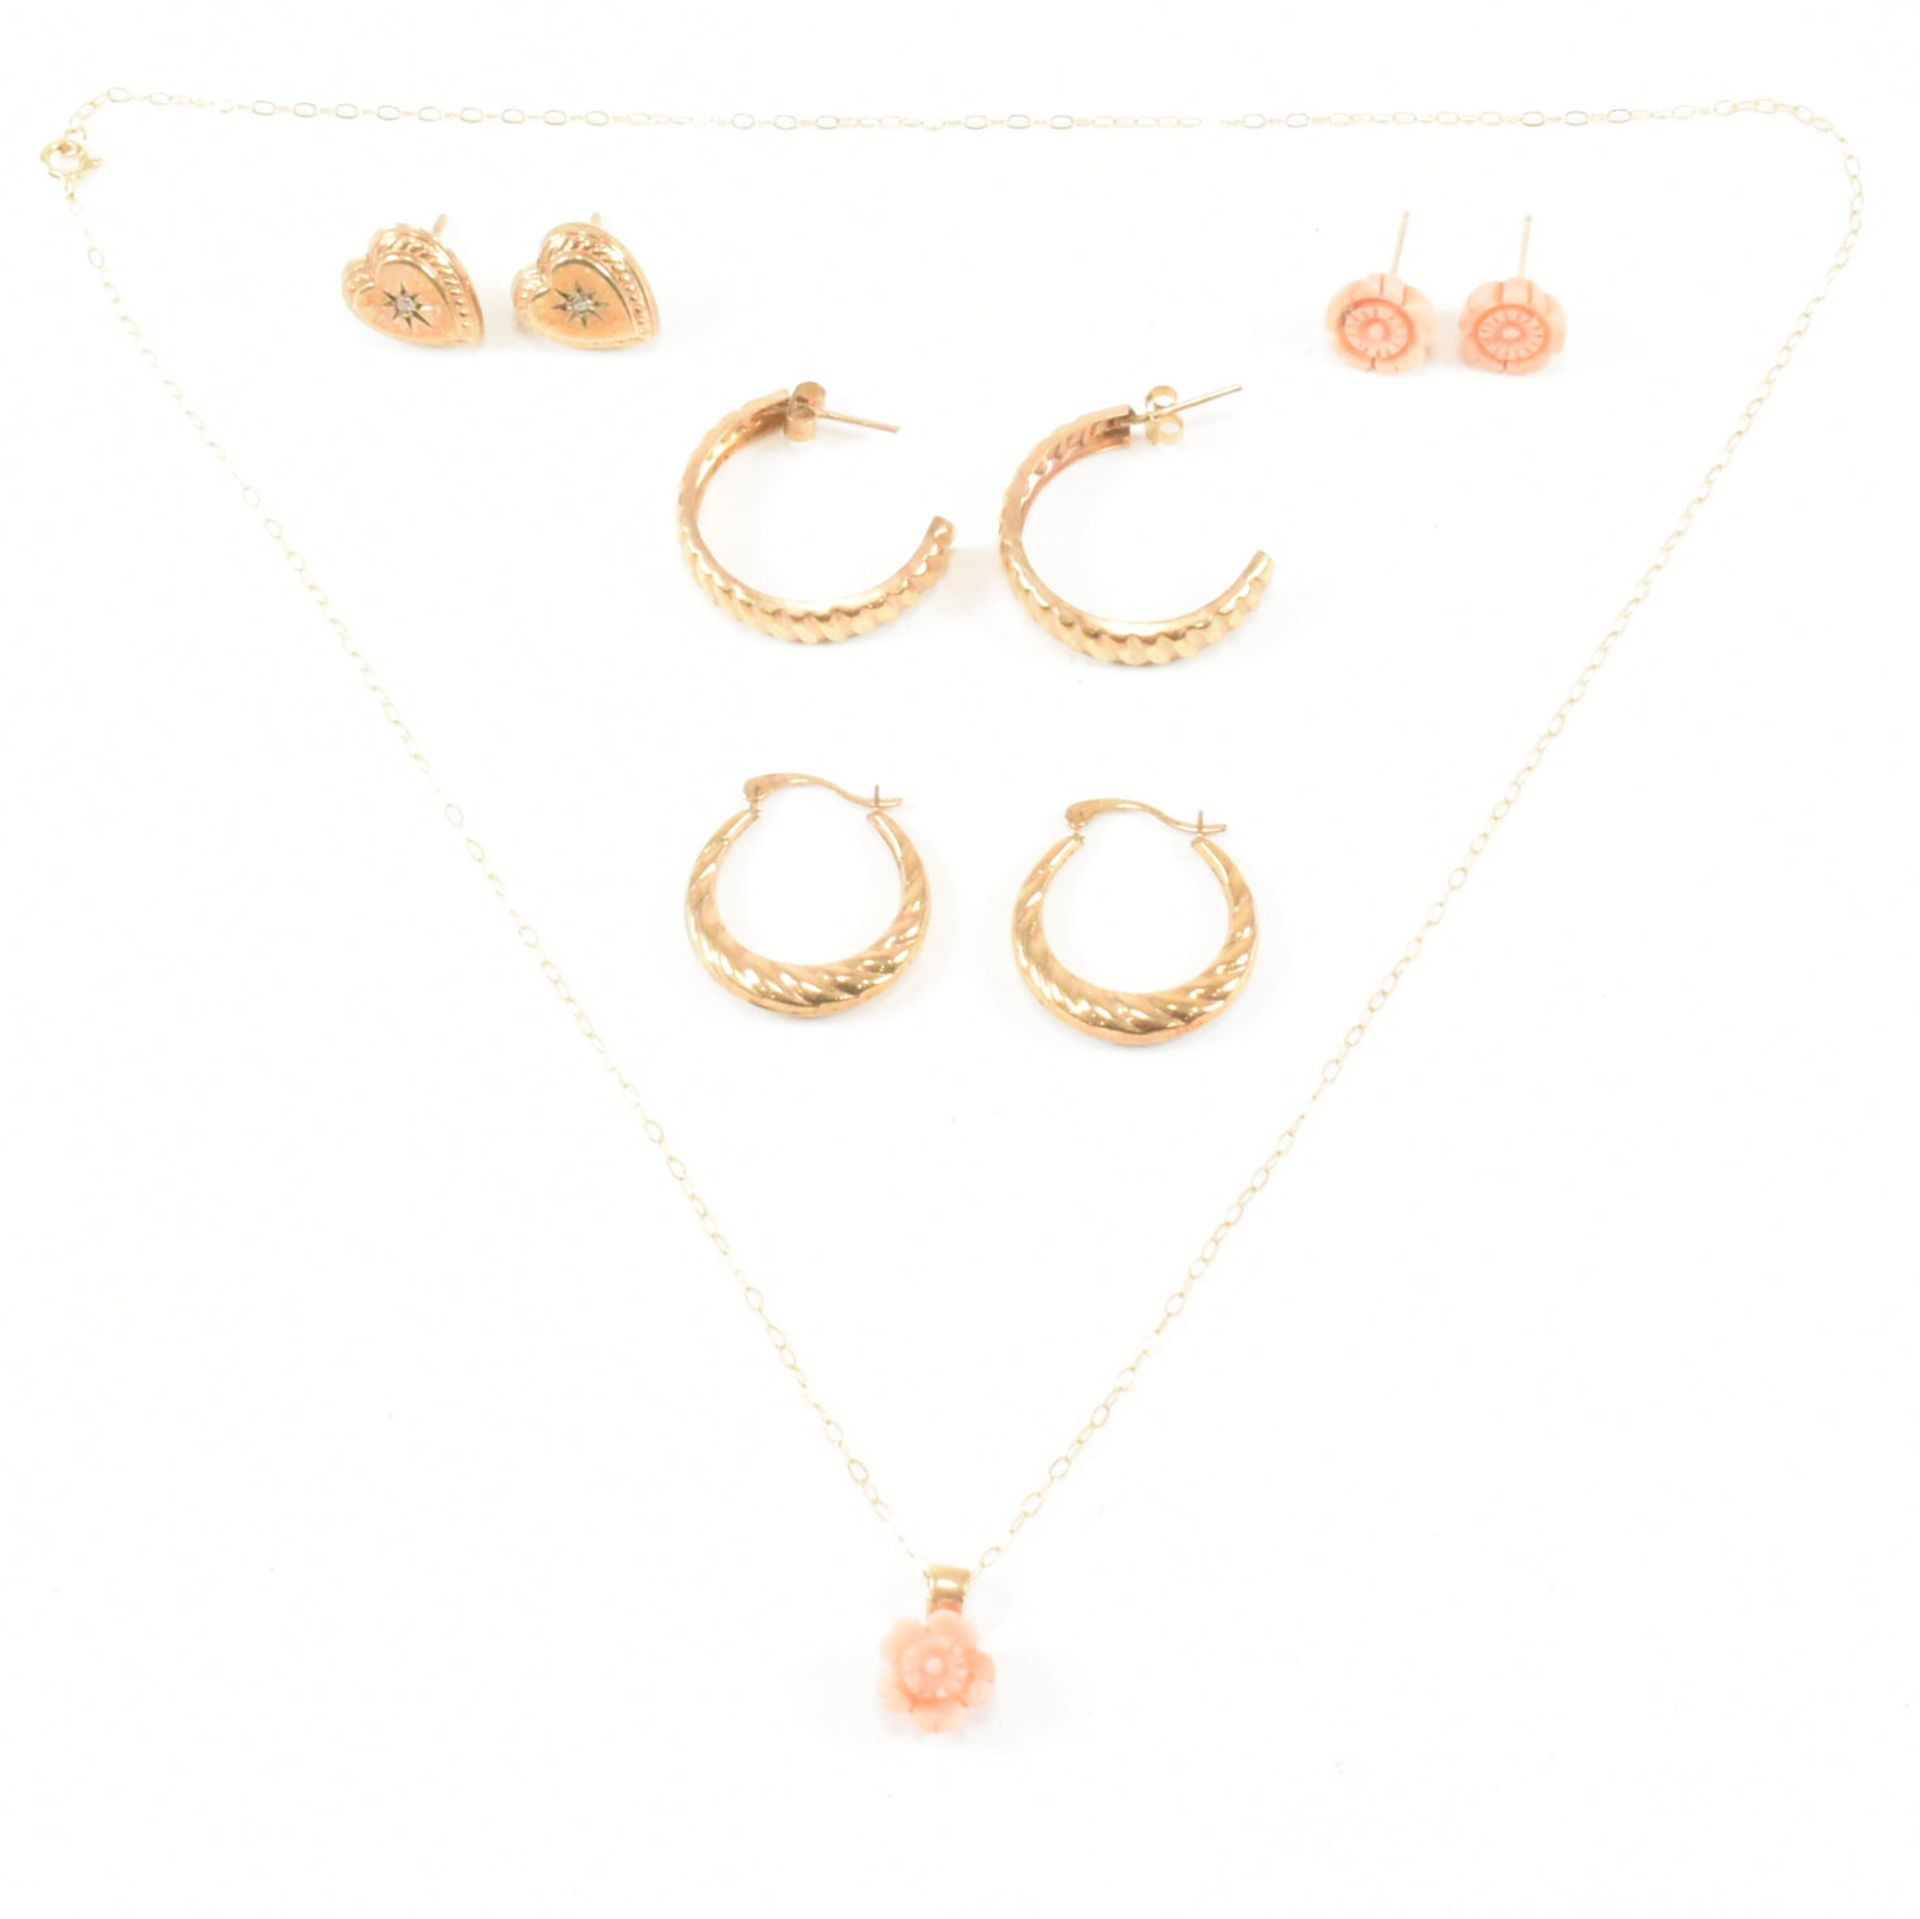 FOUR PAIRS OF 9CT GOLD EARRINGS & A 9CT GOLD PENDANT NECKLACE